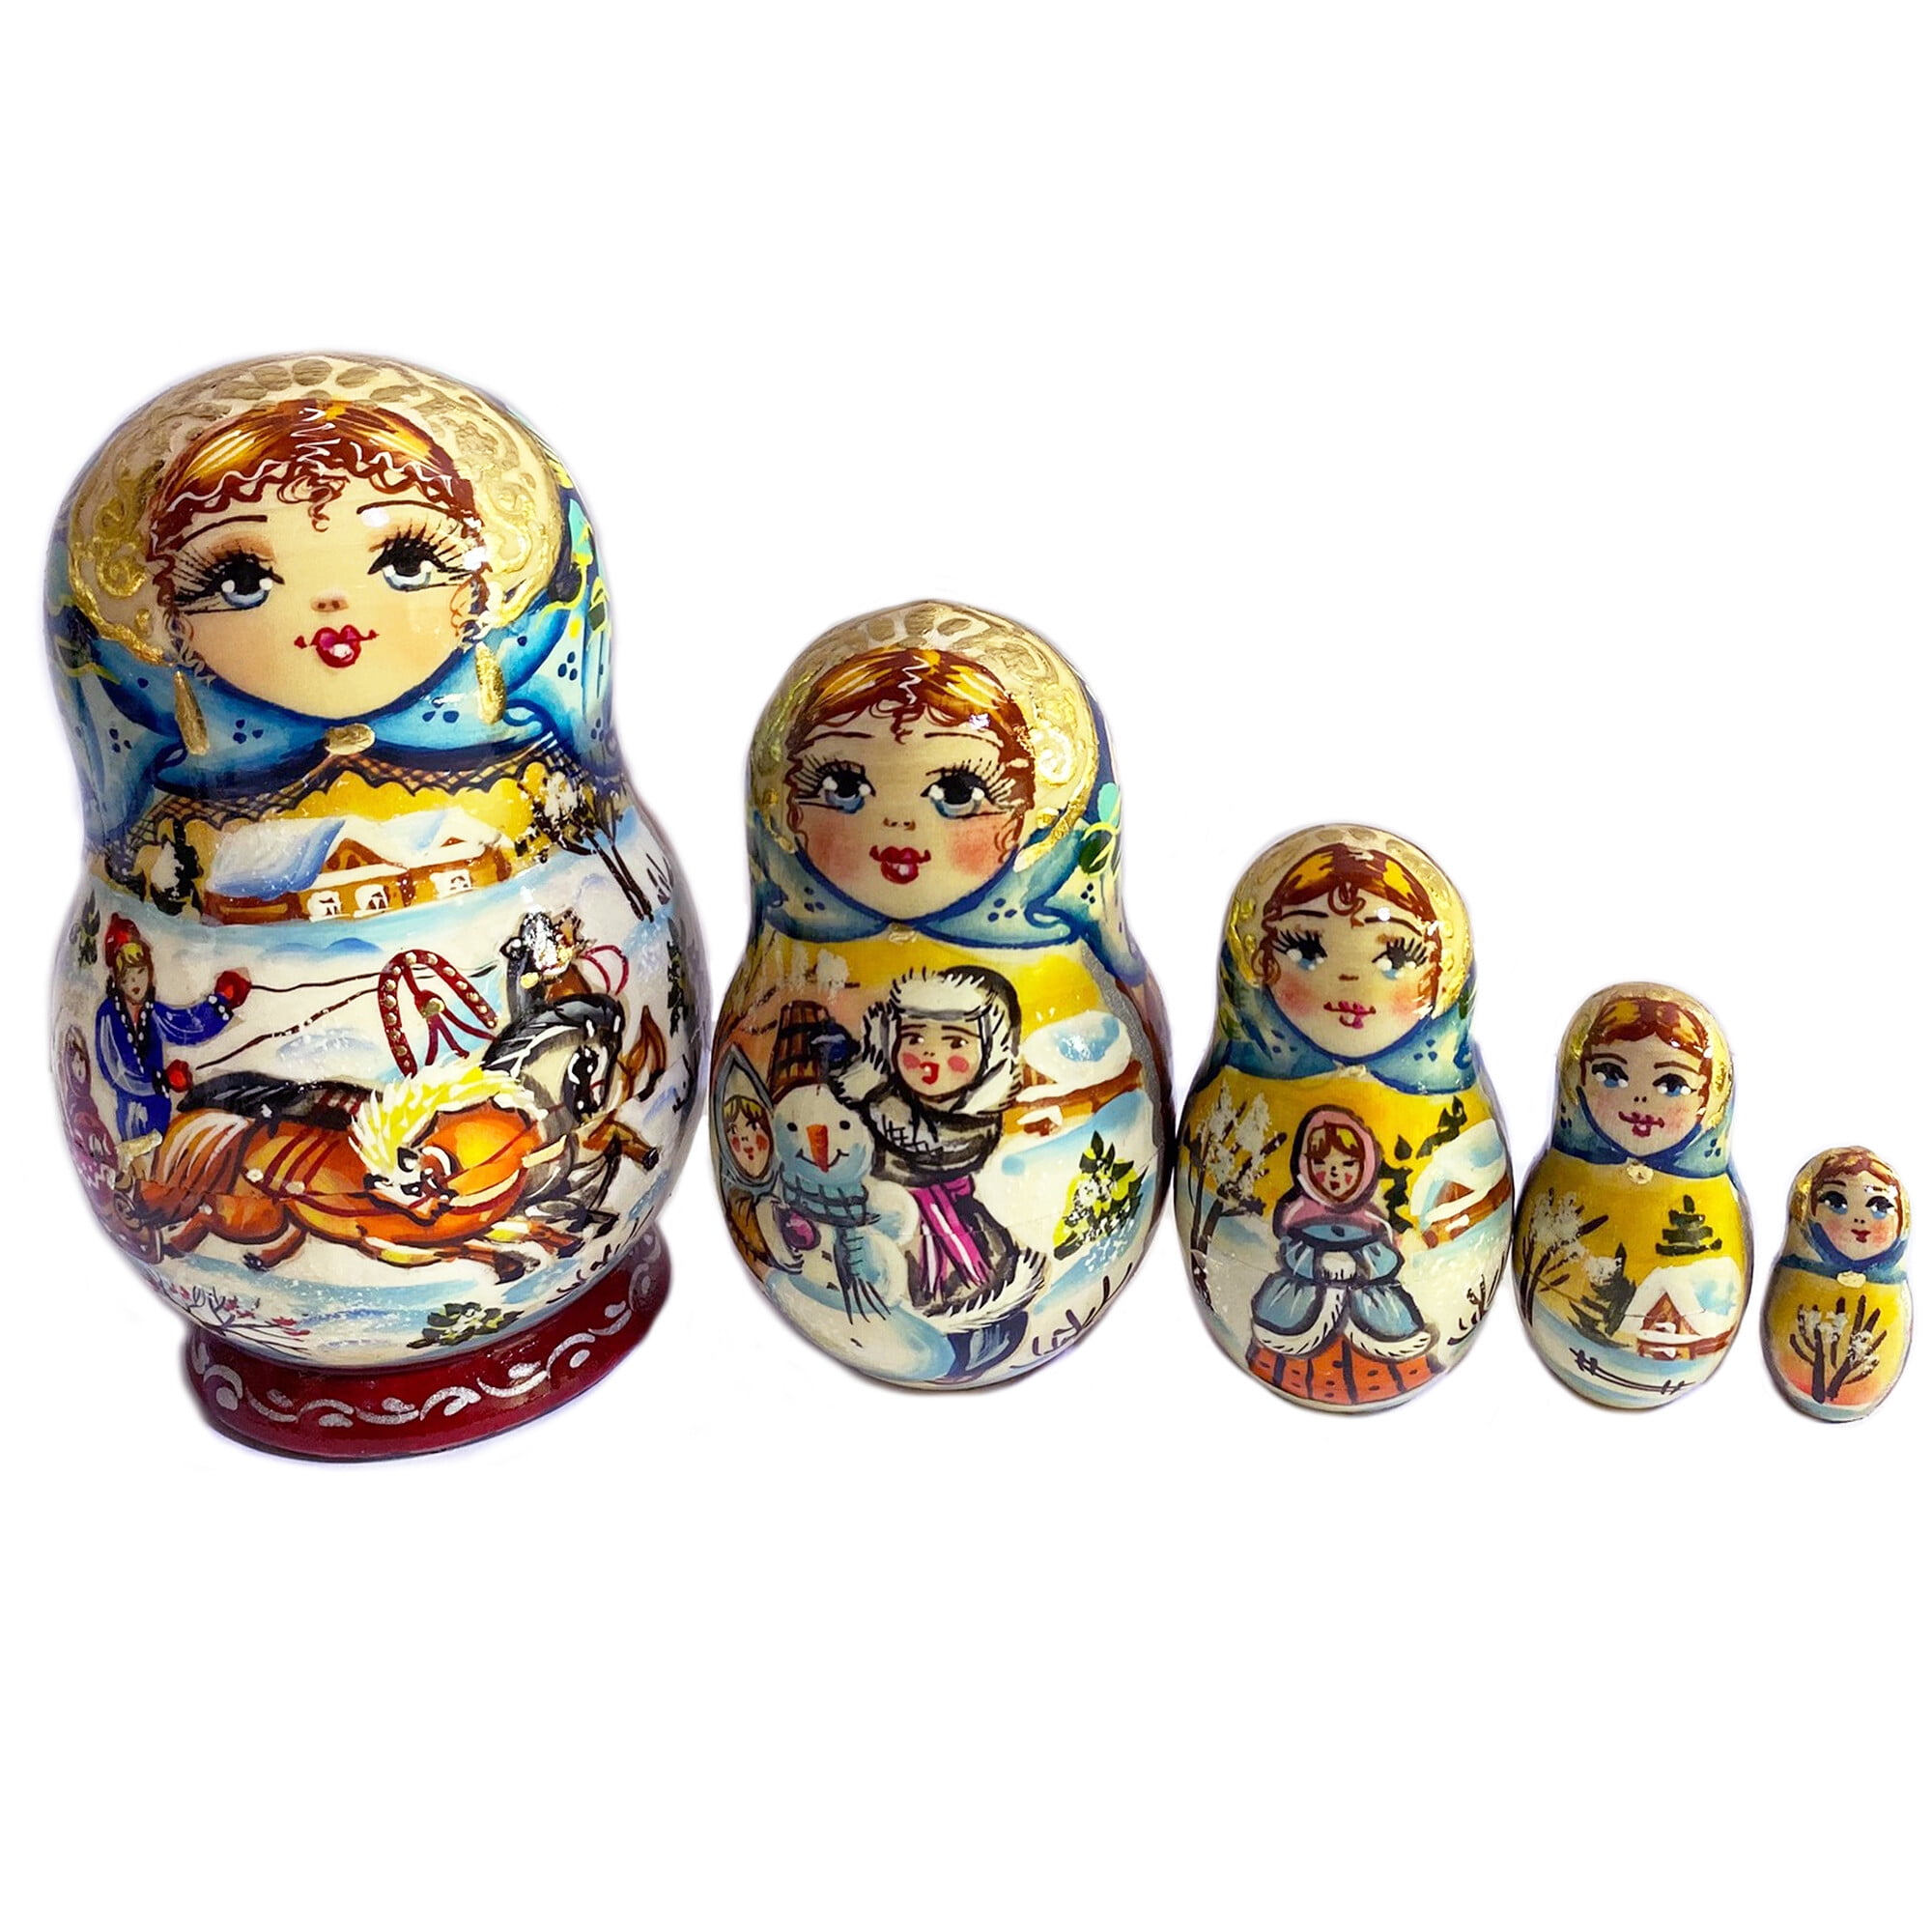 Ladybugs Blue Nesting Dolls Matryoshka Made in Russia Hand Painted Russian Doll 